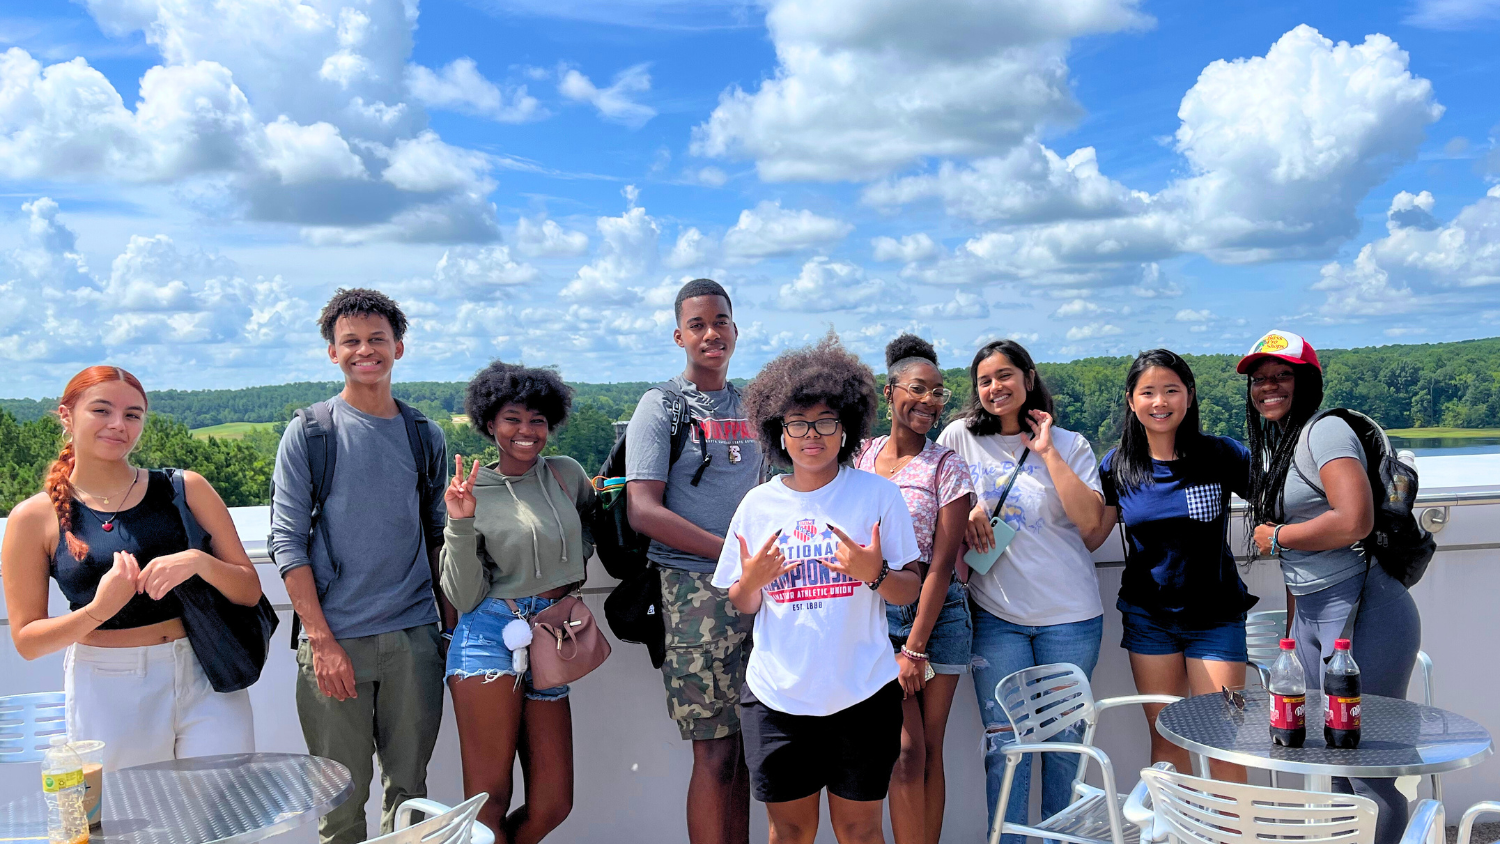 High school research group photo on a terrace - CNR High School Summer Research Program - Forestry and Environmental Resources at NC State University